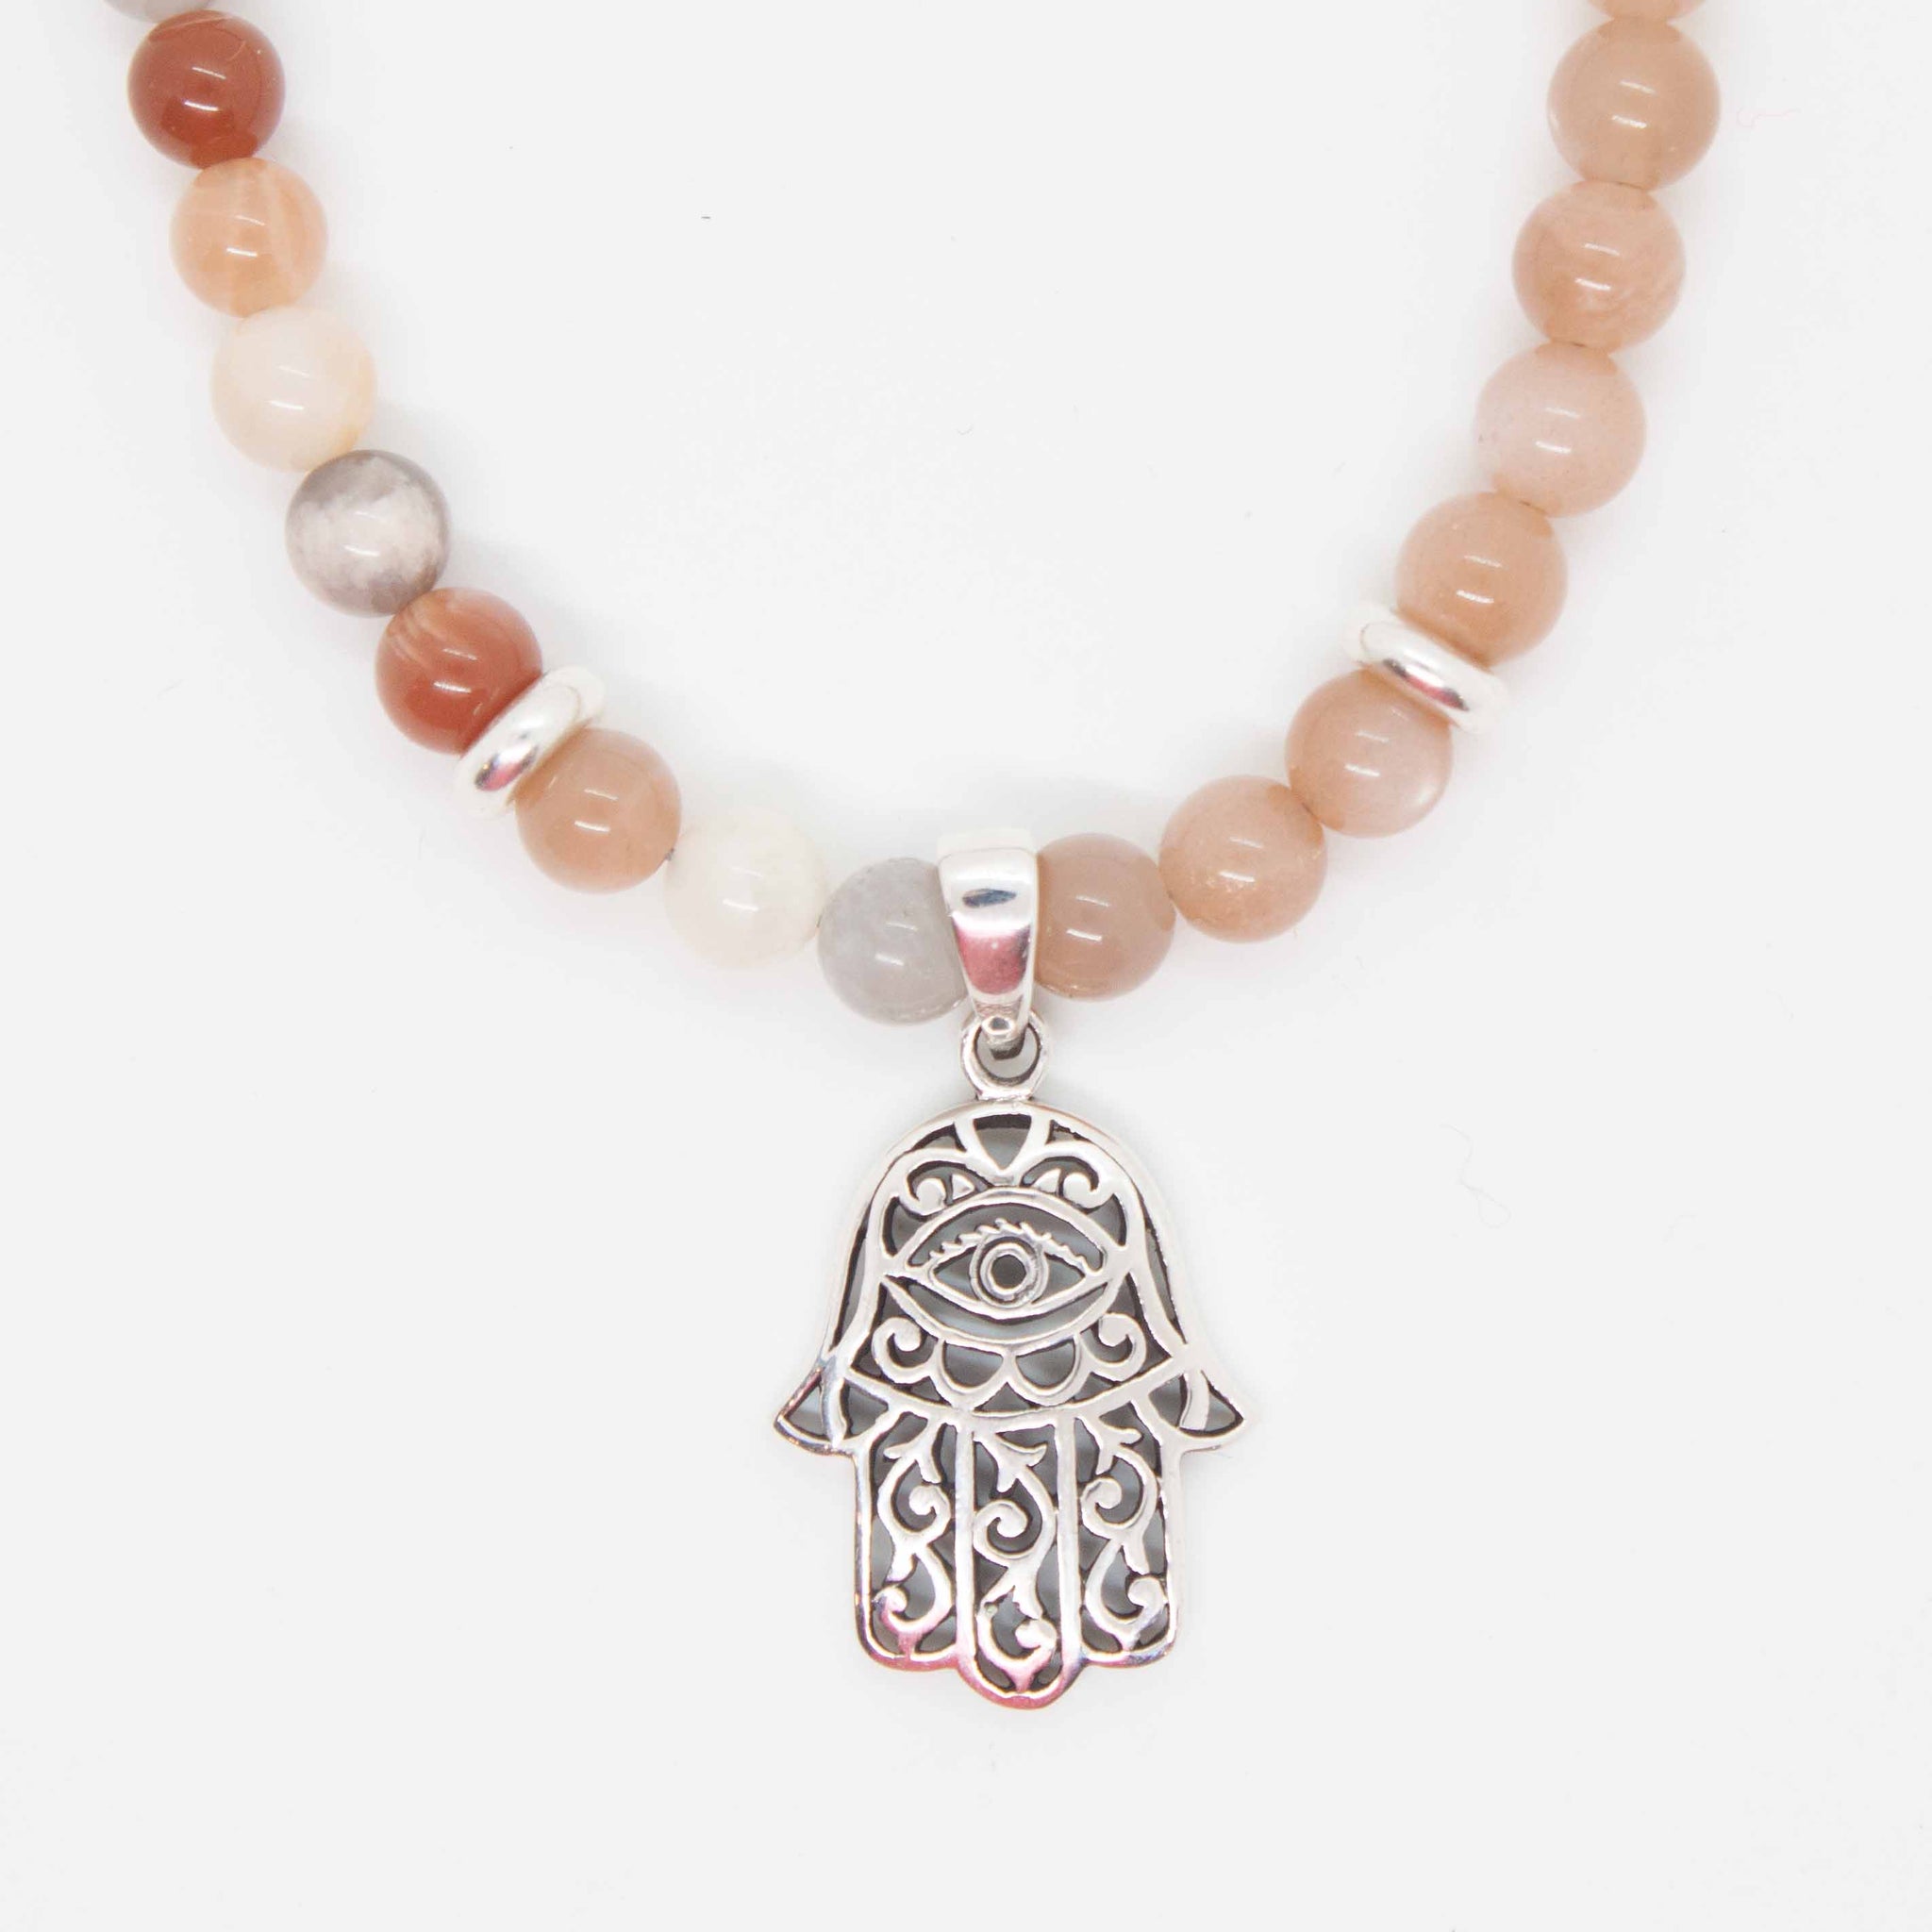 18 inch (adjustable to 20 inches) peach & mixed moonstone necklace with sterling silver hamsa charm.